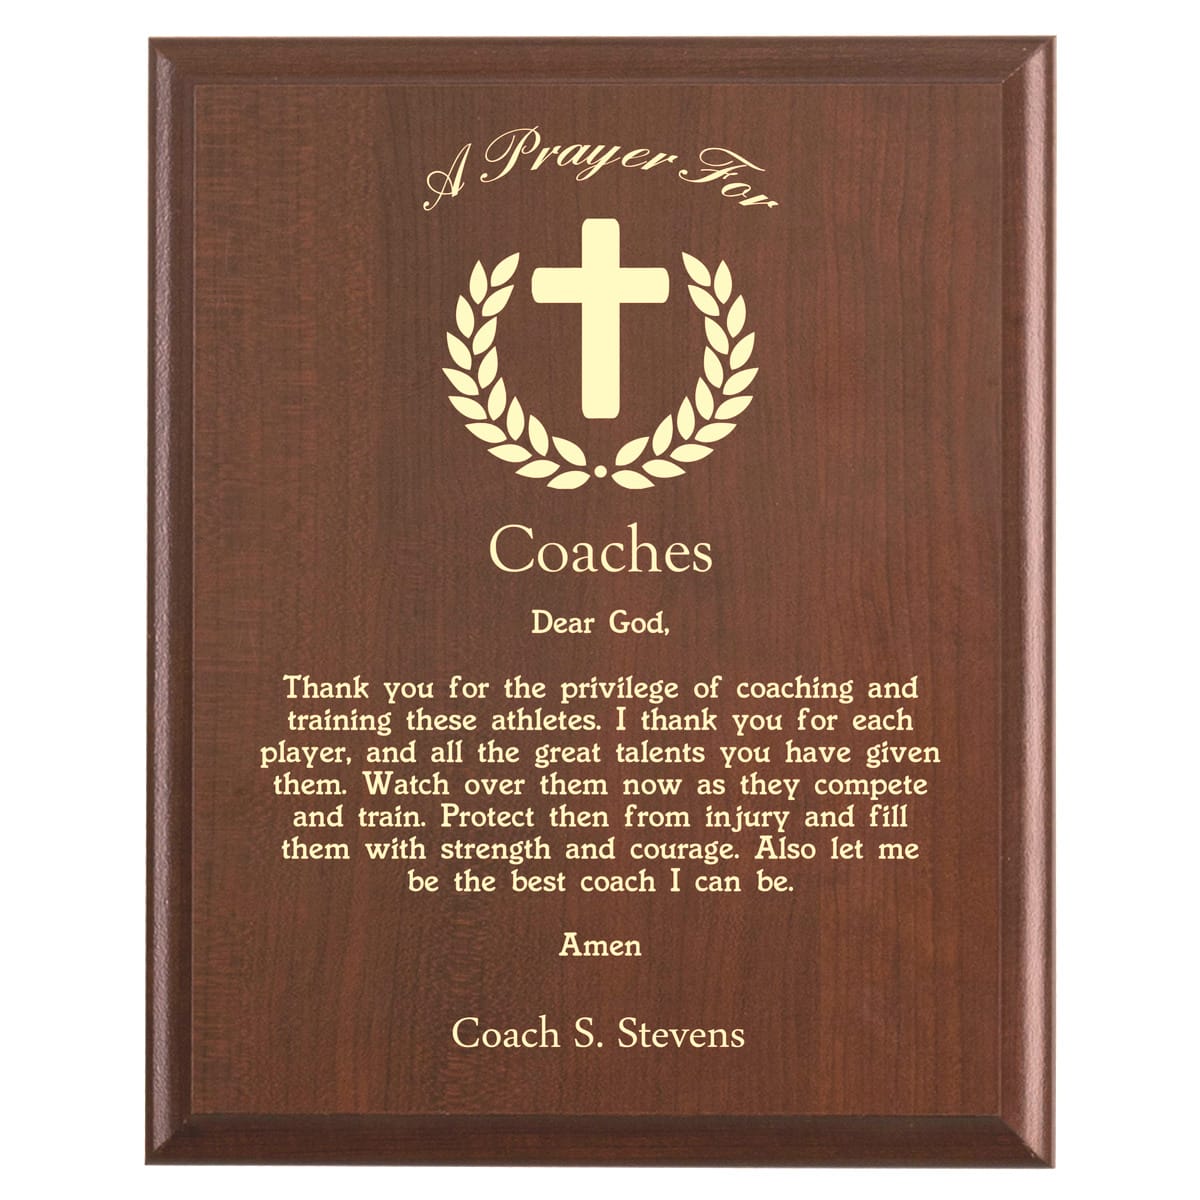 Plaque photo: Coaches Prayer Plaque design with free personalization. Wood style finish with customized text.